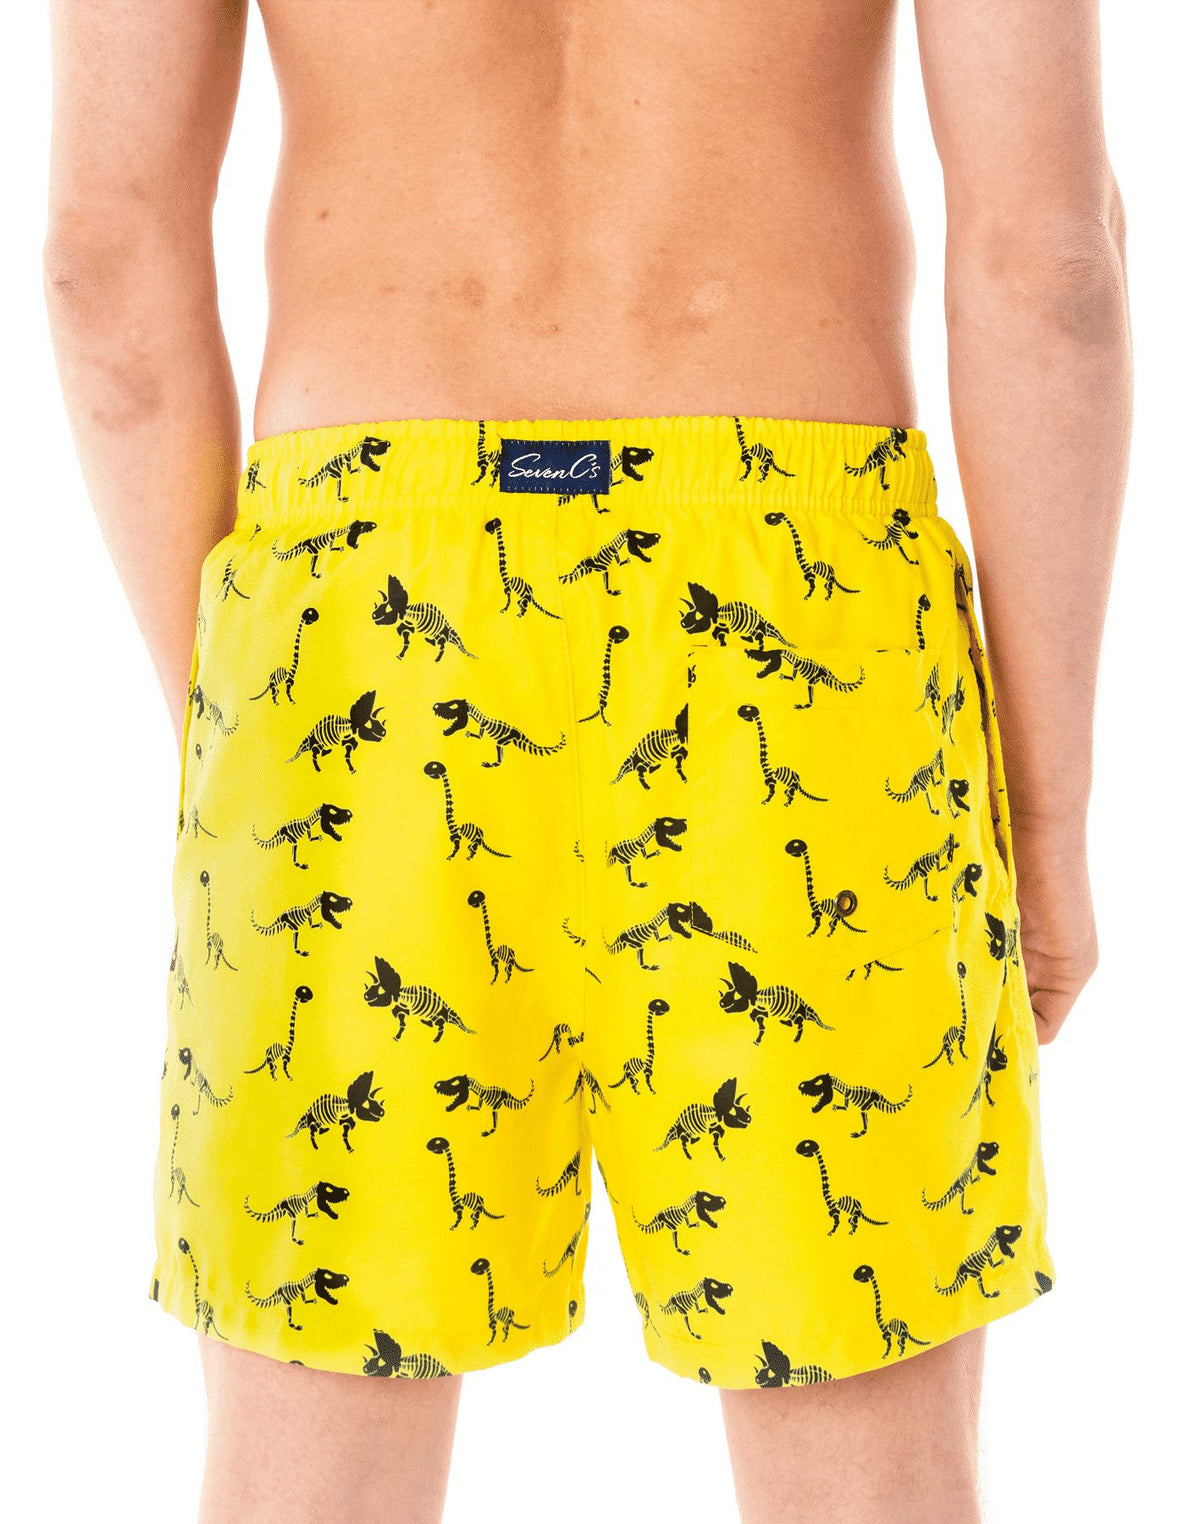 Sustainable Men's Navy Dinosaur Print Shorts from SevenC's - Back View